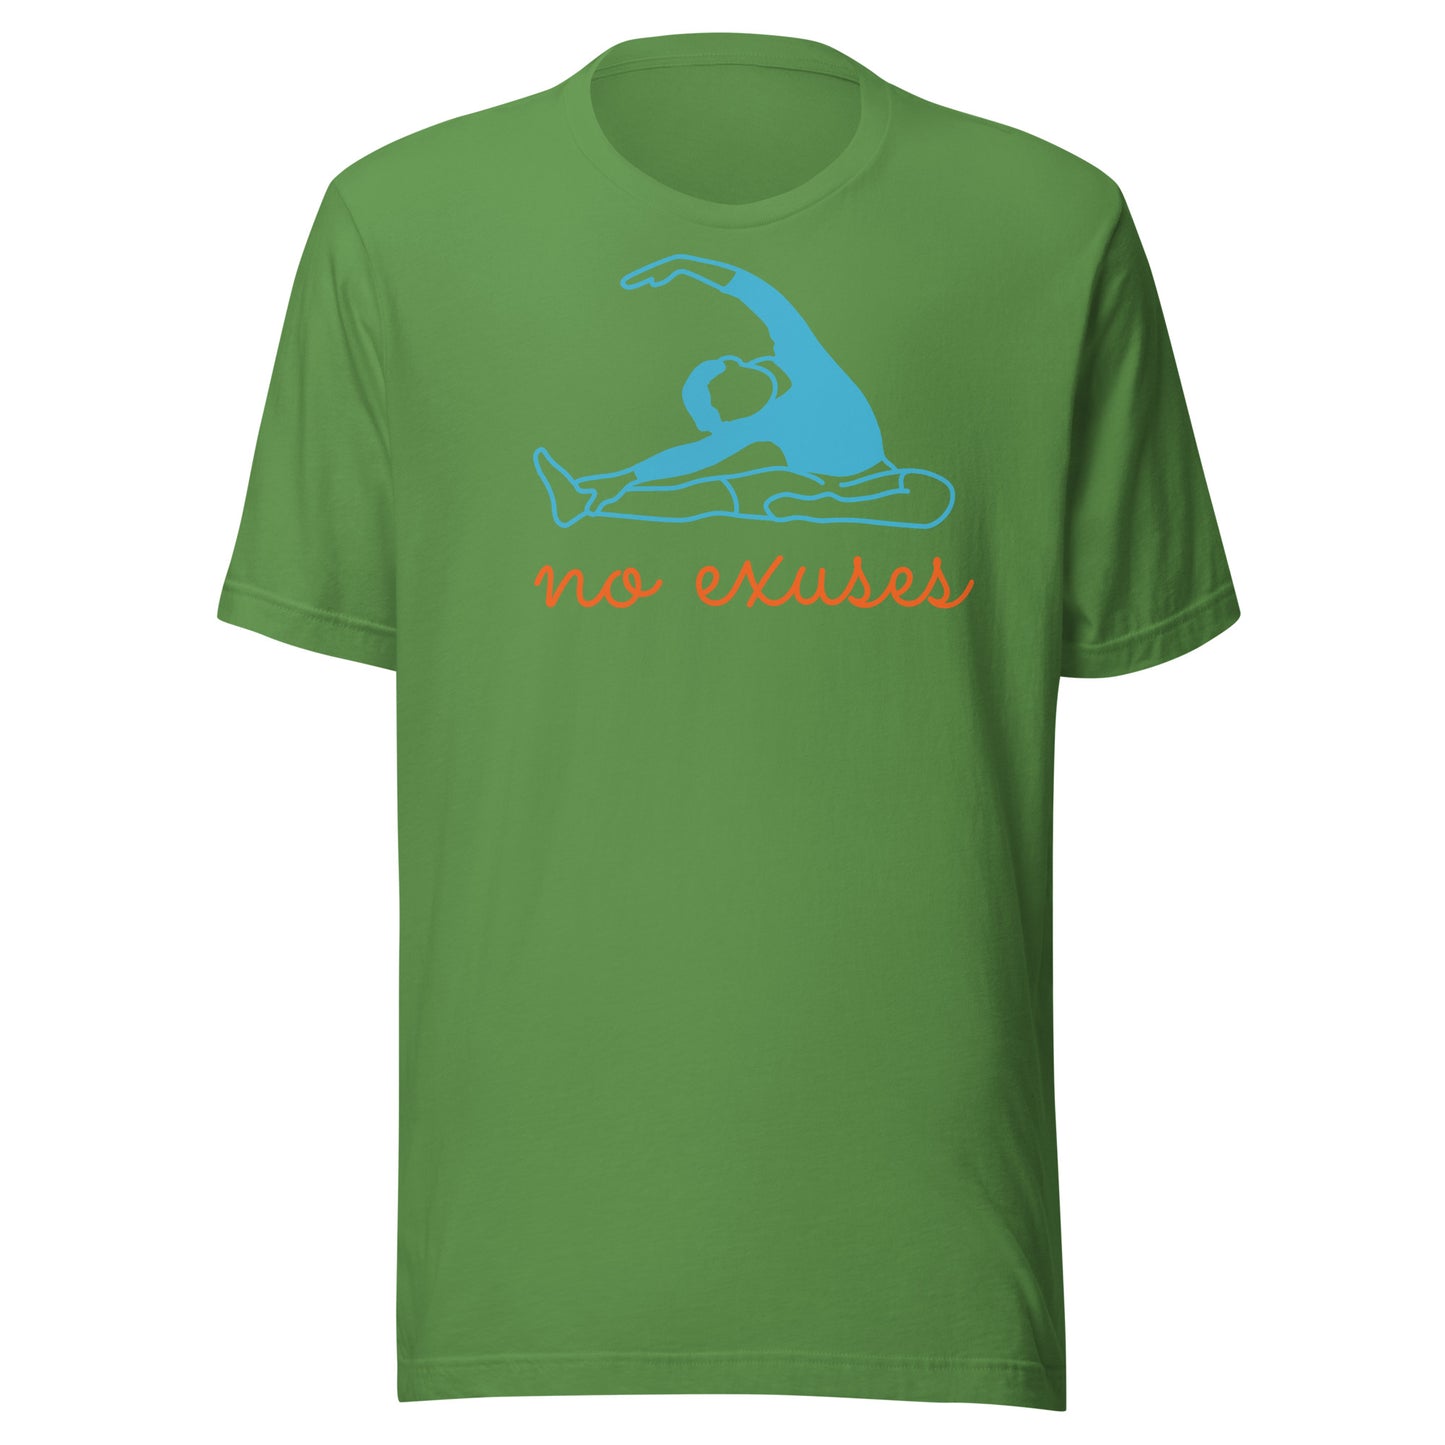 No Excuse Yoga T-Shirts for Ultimate Comfort and Style!